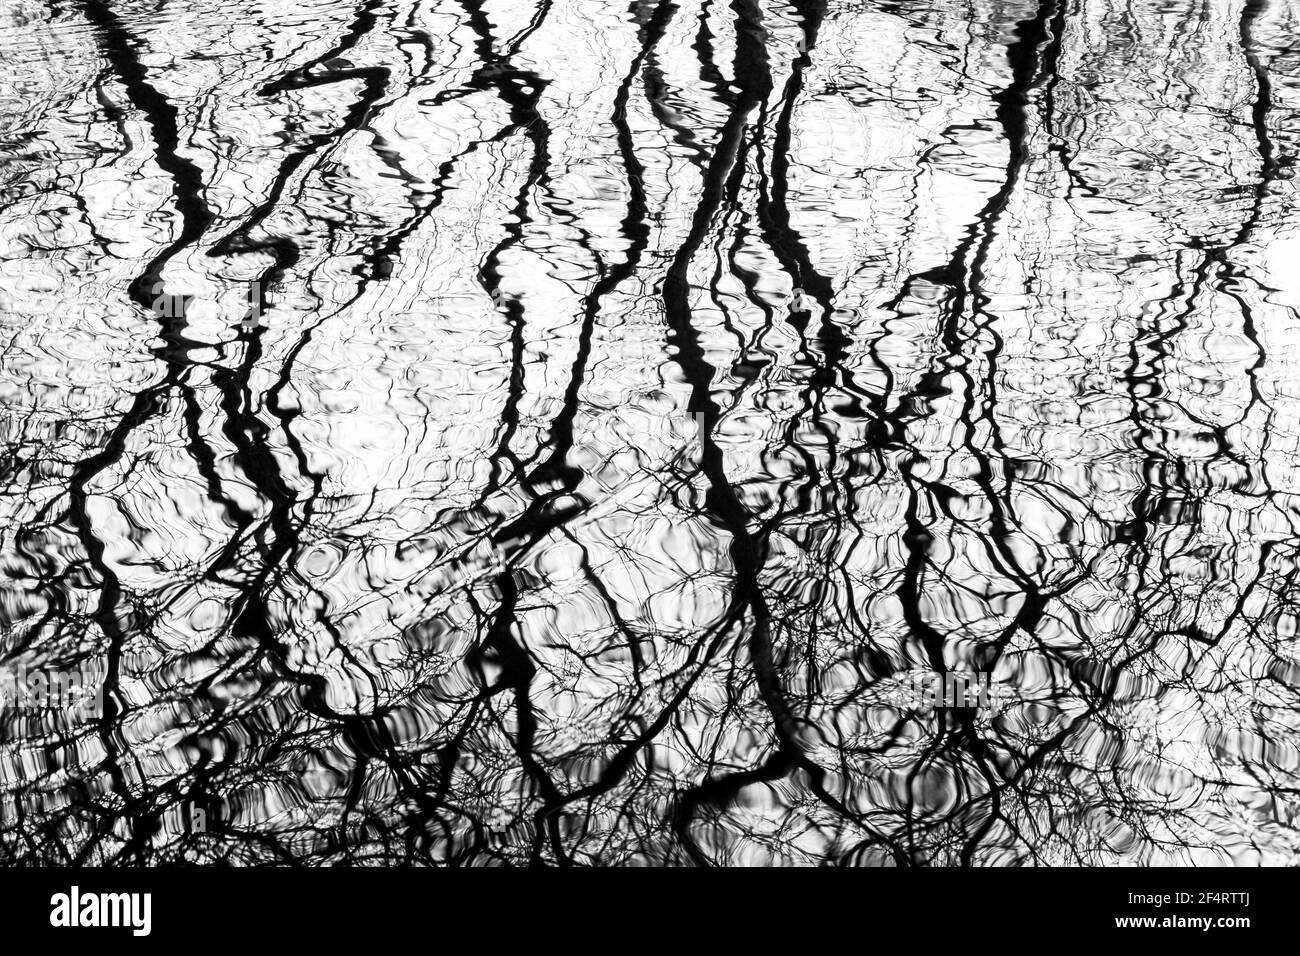 Black and white abstract of reflections in water. Stock Photo